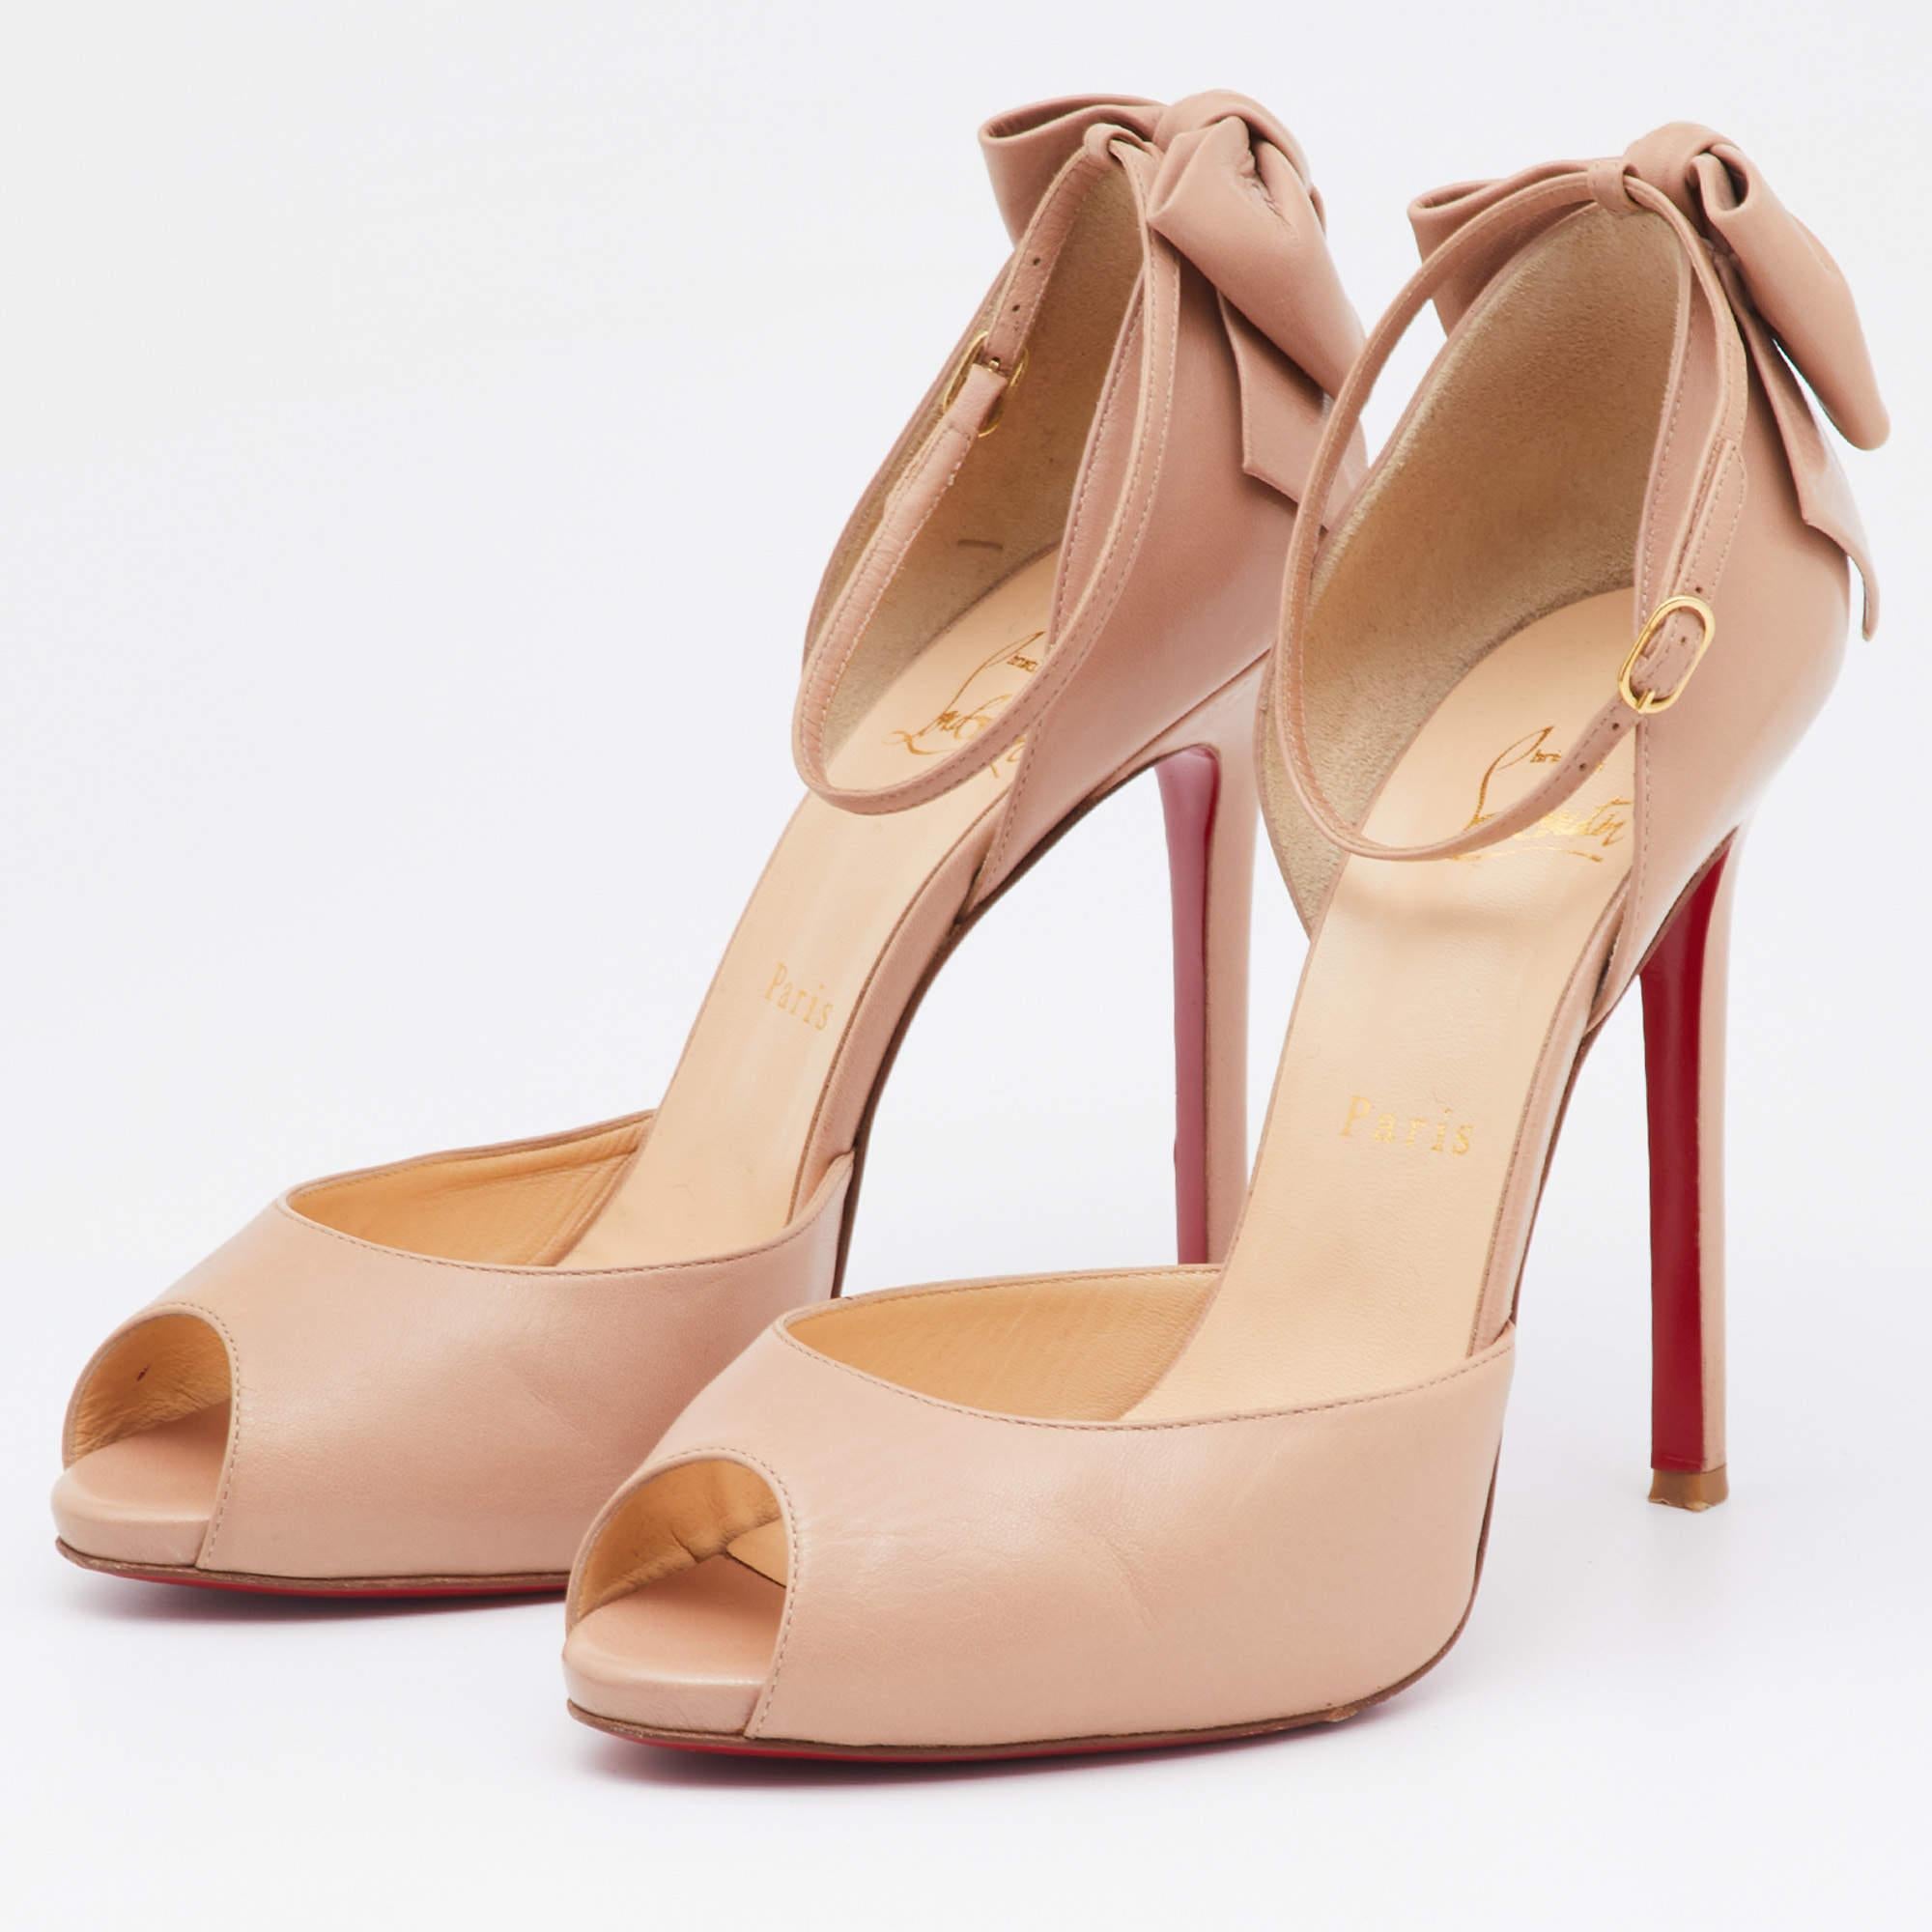 Christian Louboutin Beige Leather Dos Noeud Bow Ankle Strap Pumps Size 39 1